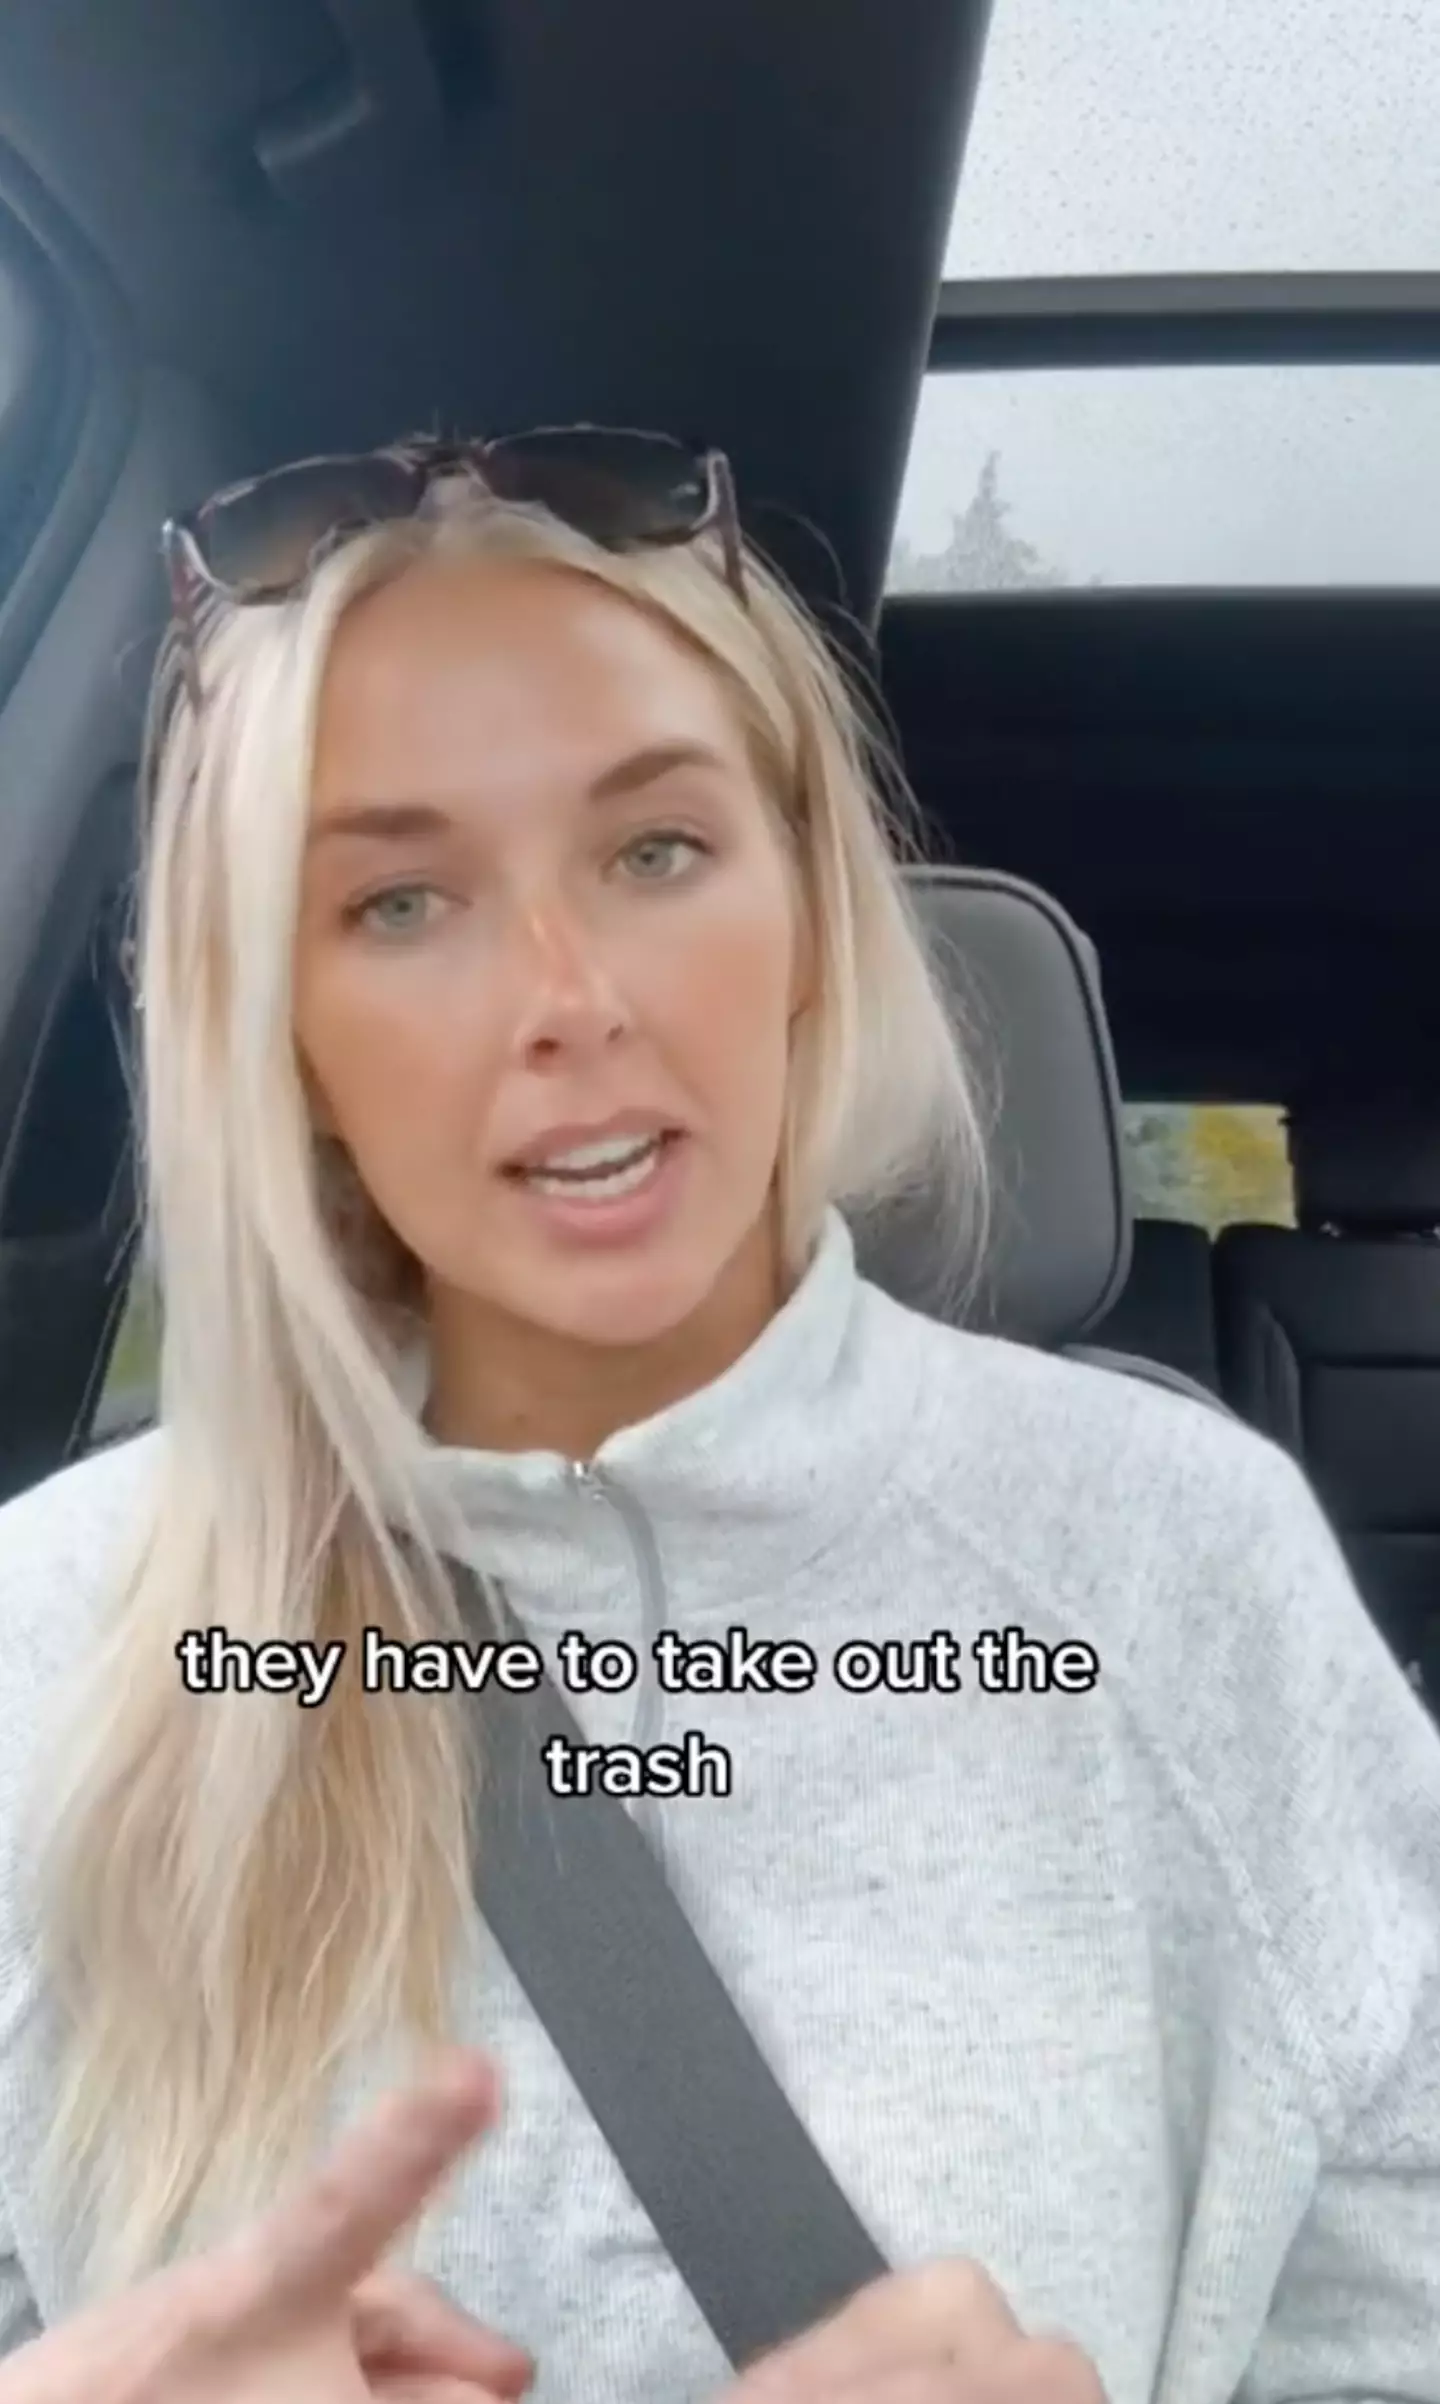 The mum-of-four shared the ‘game changer’ hack on TikTok.